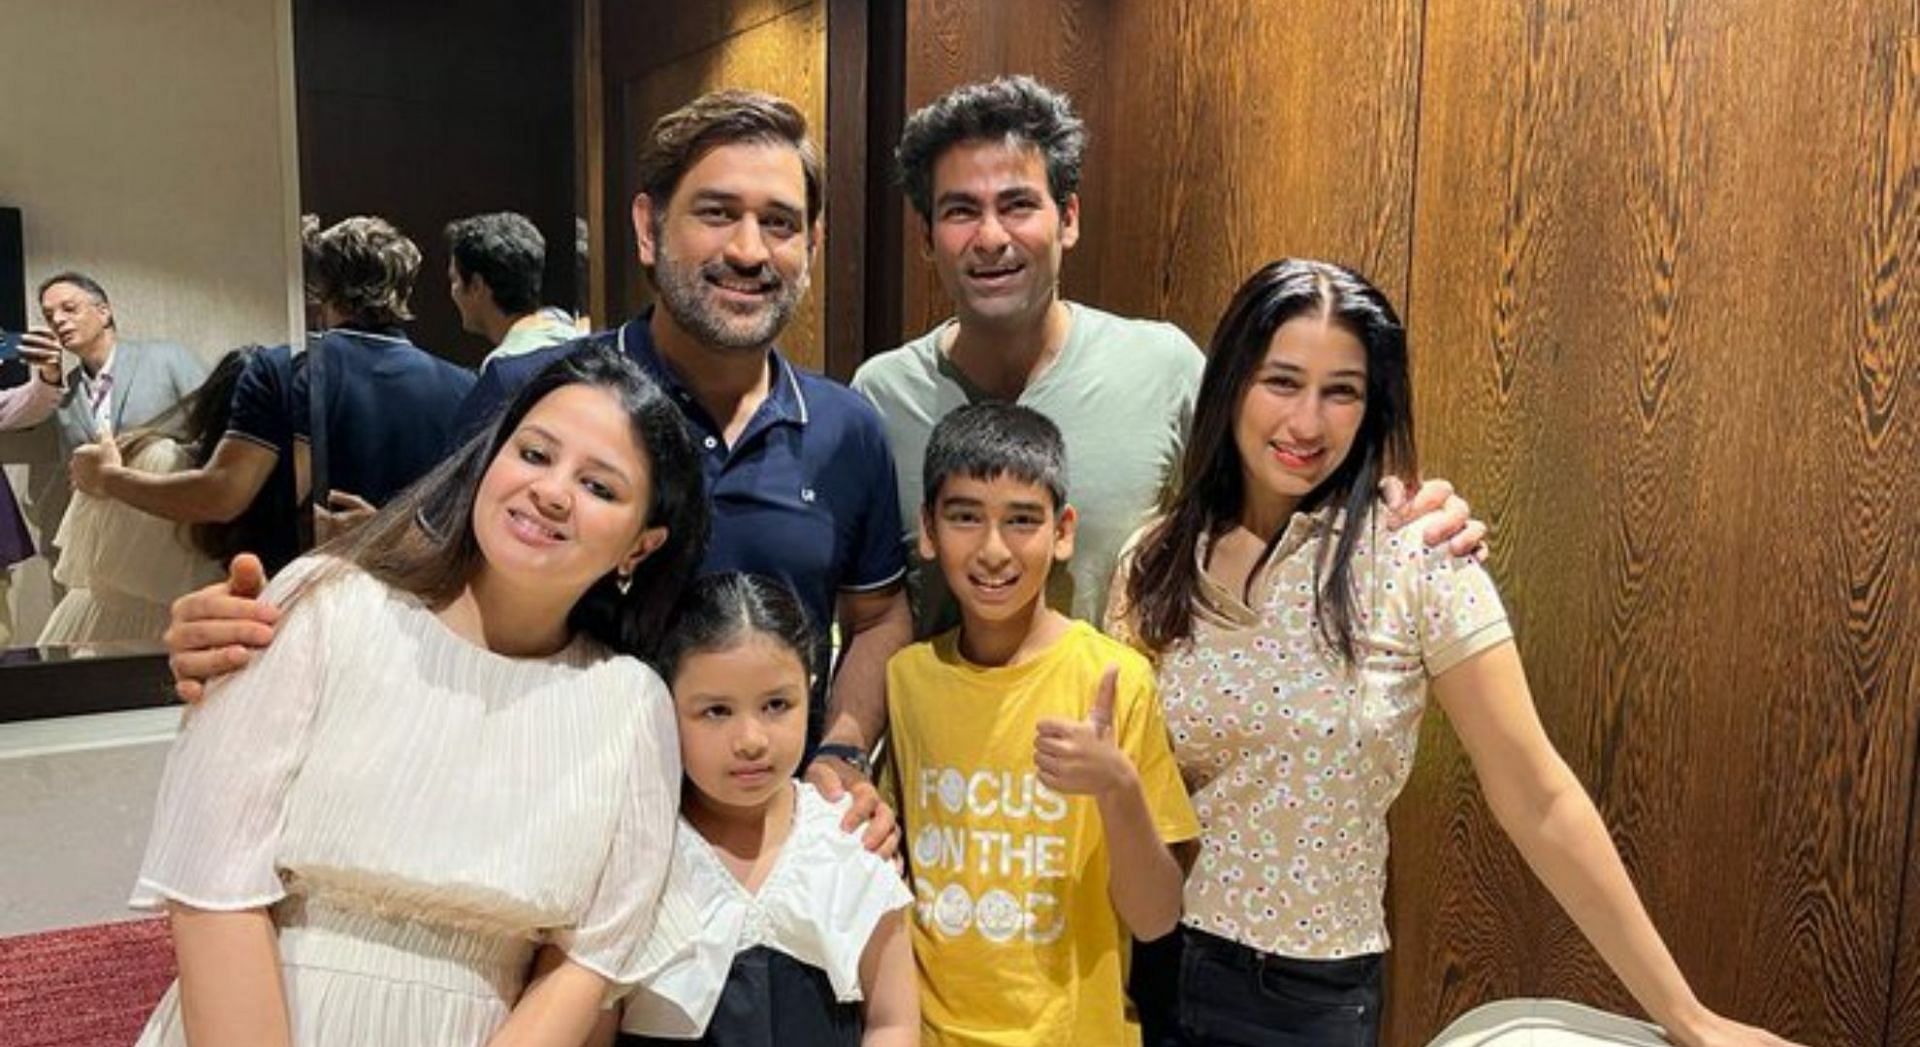 [Pictures] “Get well soon” - Mohammad Kaif reunites with MS Dhoni, clicks family pictures at airport